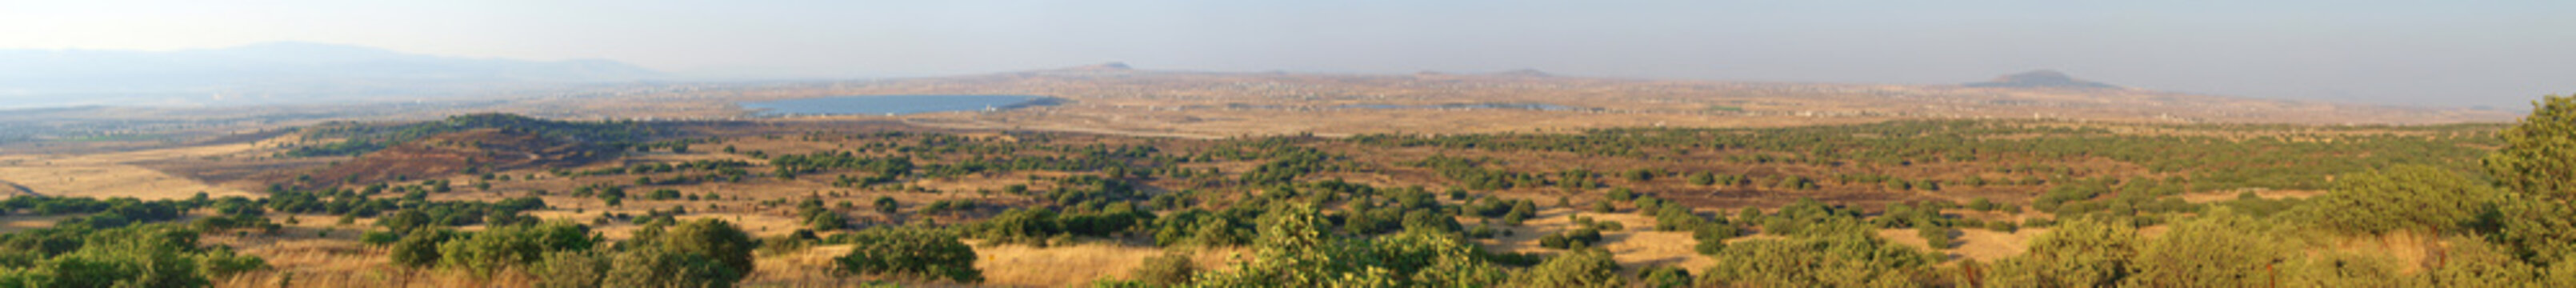 View on the territory of Syria from the Golan Heights